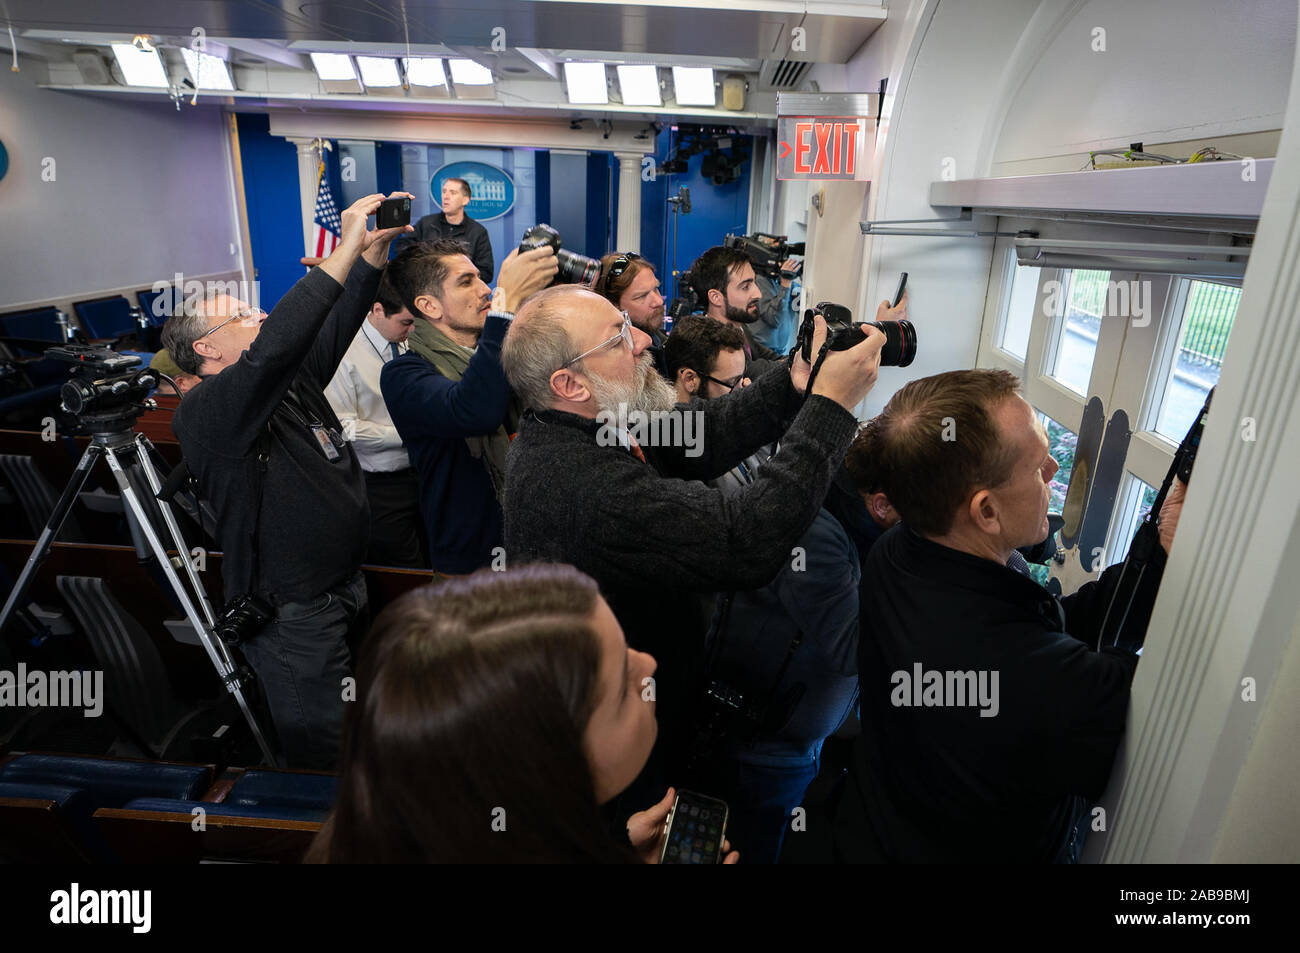 Washington, United States. 26th Nov, 2019. Photographer take photos through a window in the briefing room as the White House is placed on lockdown after an aircraft violated secure airspace, in Washington, DC on November 26, 2019. Fighter jets were scrambled and a 30 minute lockdown was placed on the White House and Capitol following an airspace violation, according to law enforcement officials. Photo by Kevin Dietsch Credit: UPI/Alamy Live News Stock Photo